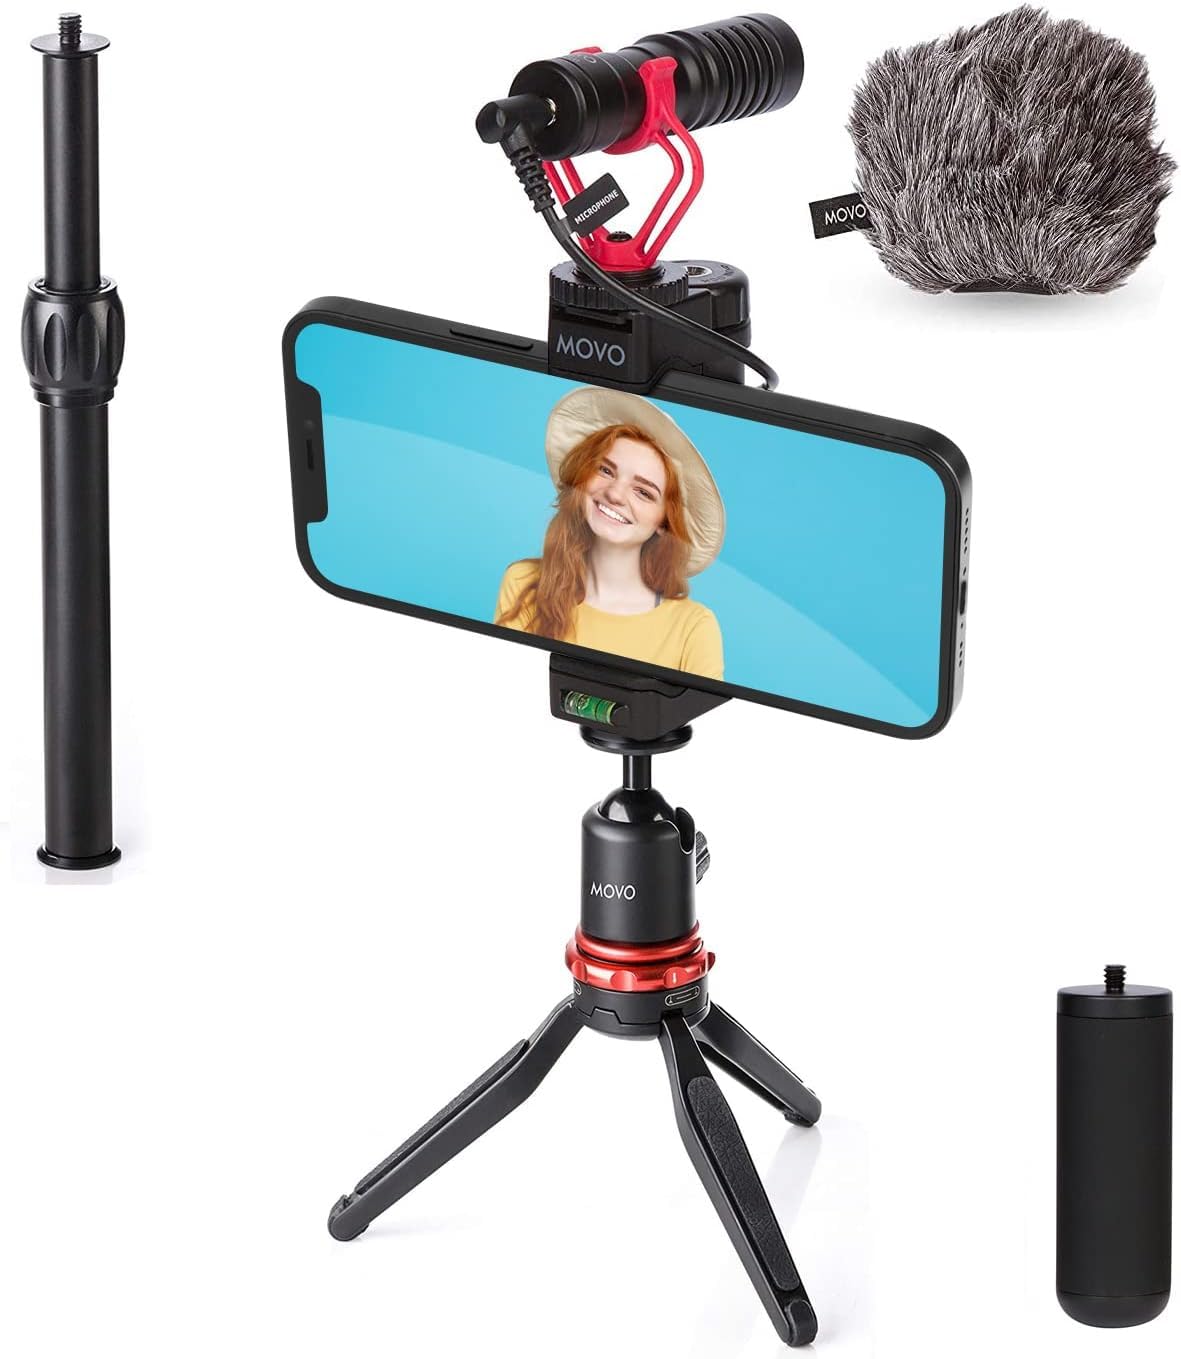 Movo VXR10+ Smartphone Vlogging Kit with Mini Tripod, Phone Grip, and Video Microphone Compatible with iPhone and Android - for YouTube, TIK Tok, Filming, Vlogging  - Acceptable